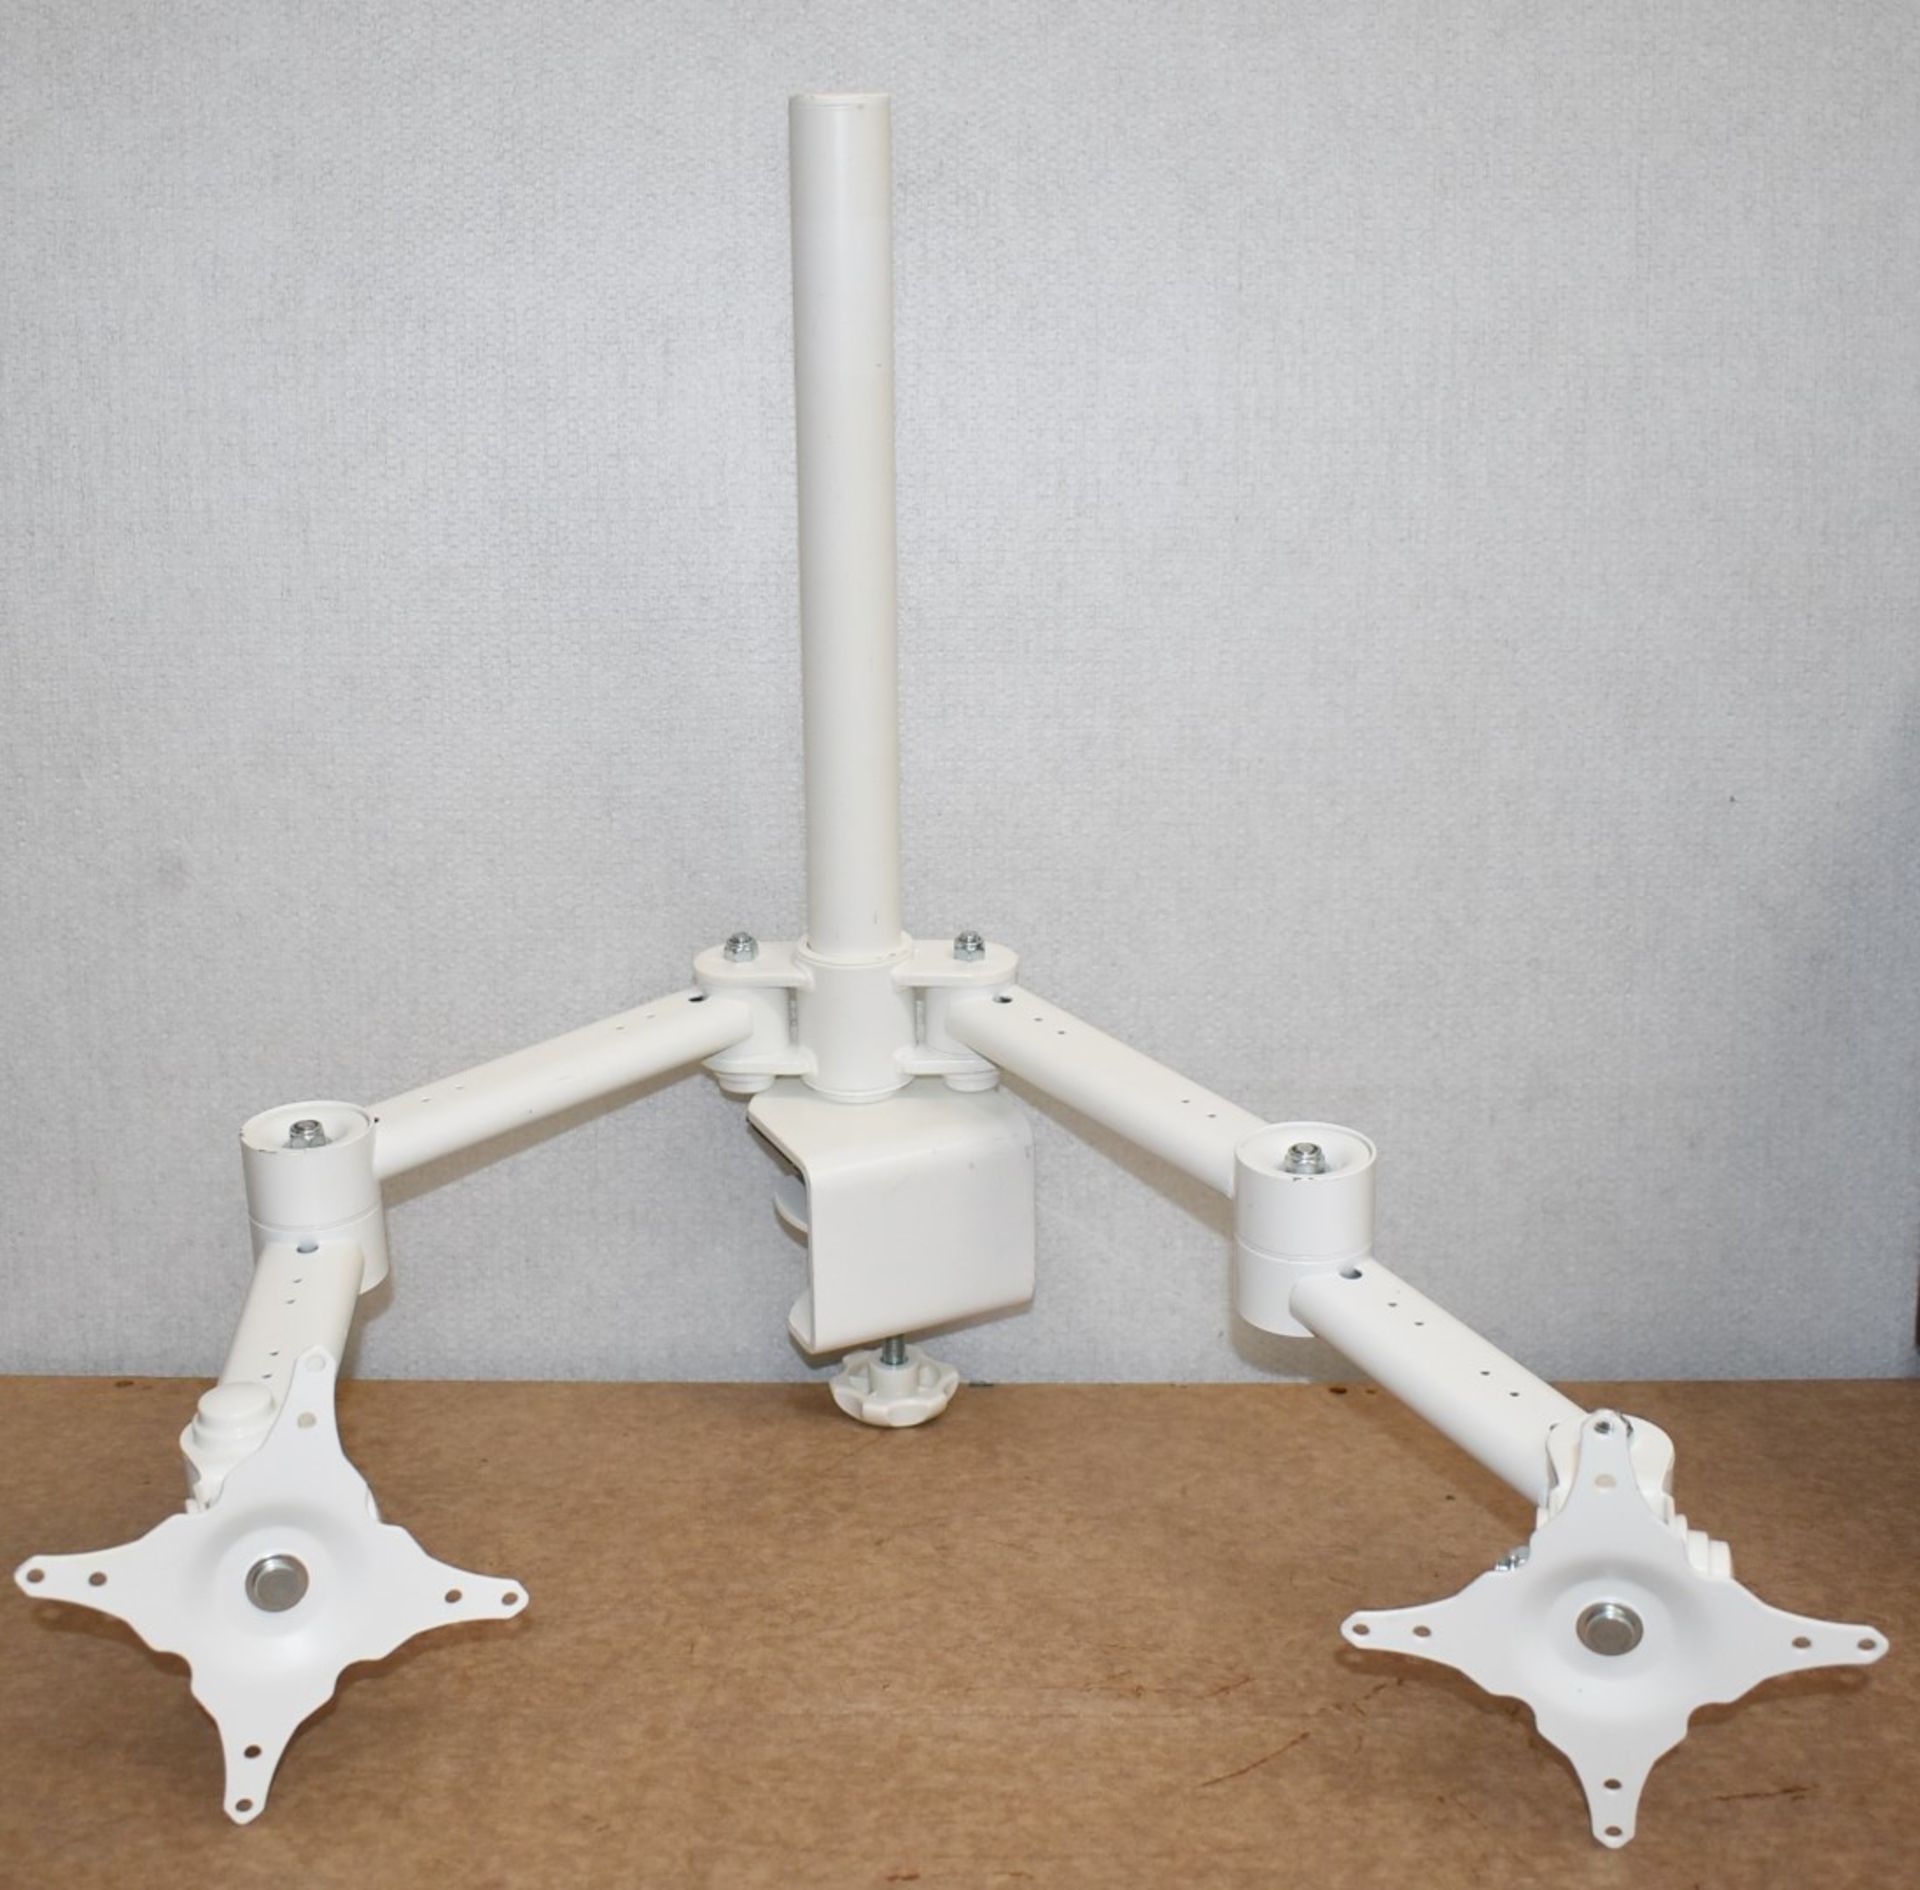 1 x Desk Mounted Double Monitor Stand With Vesa Mounting Brackets - Ref: MPC CC - CL678 -